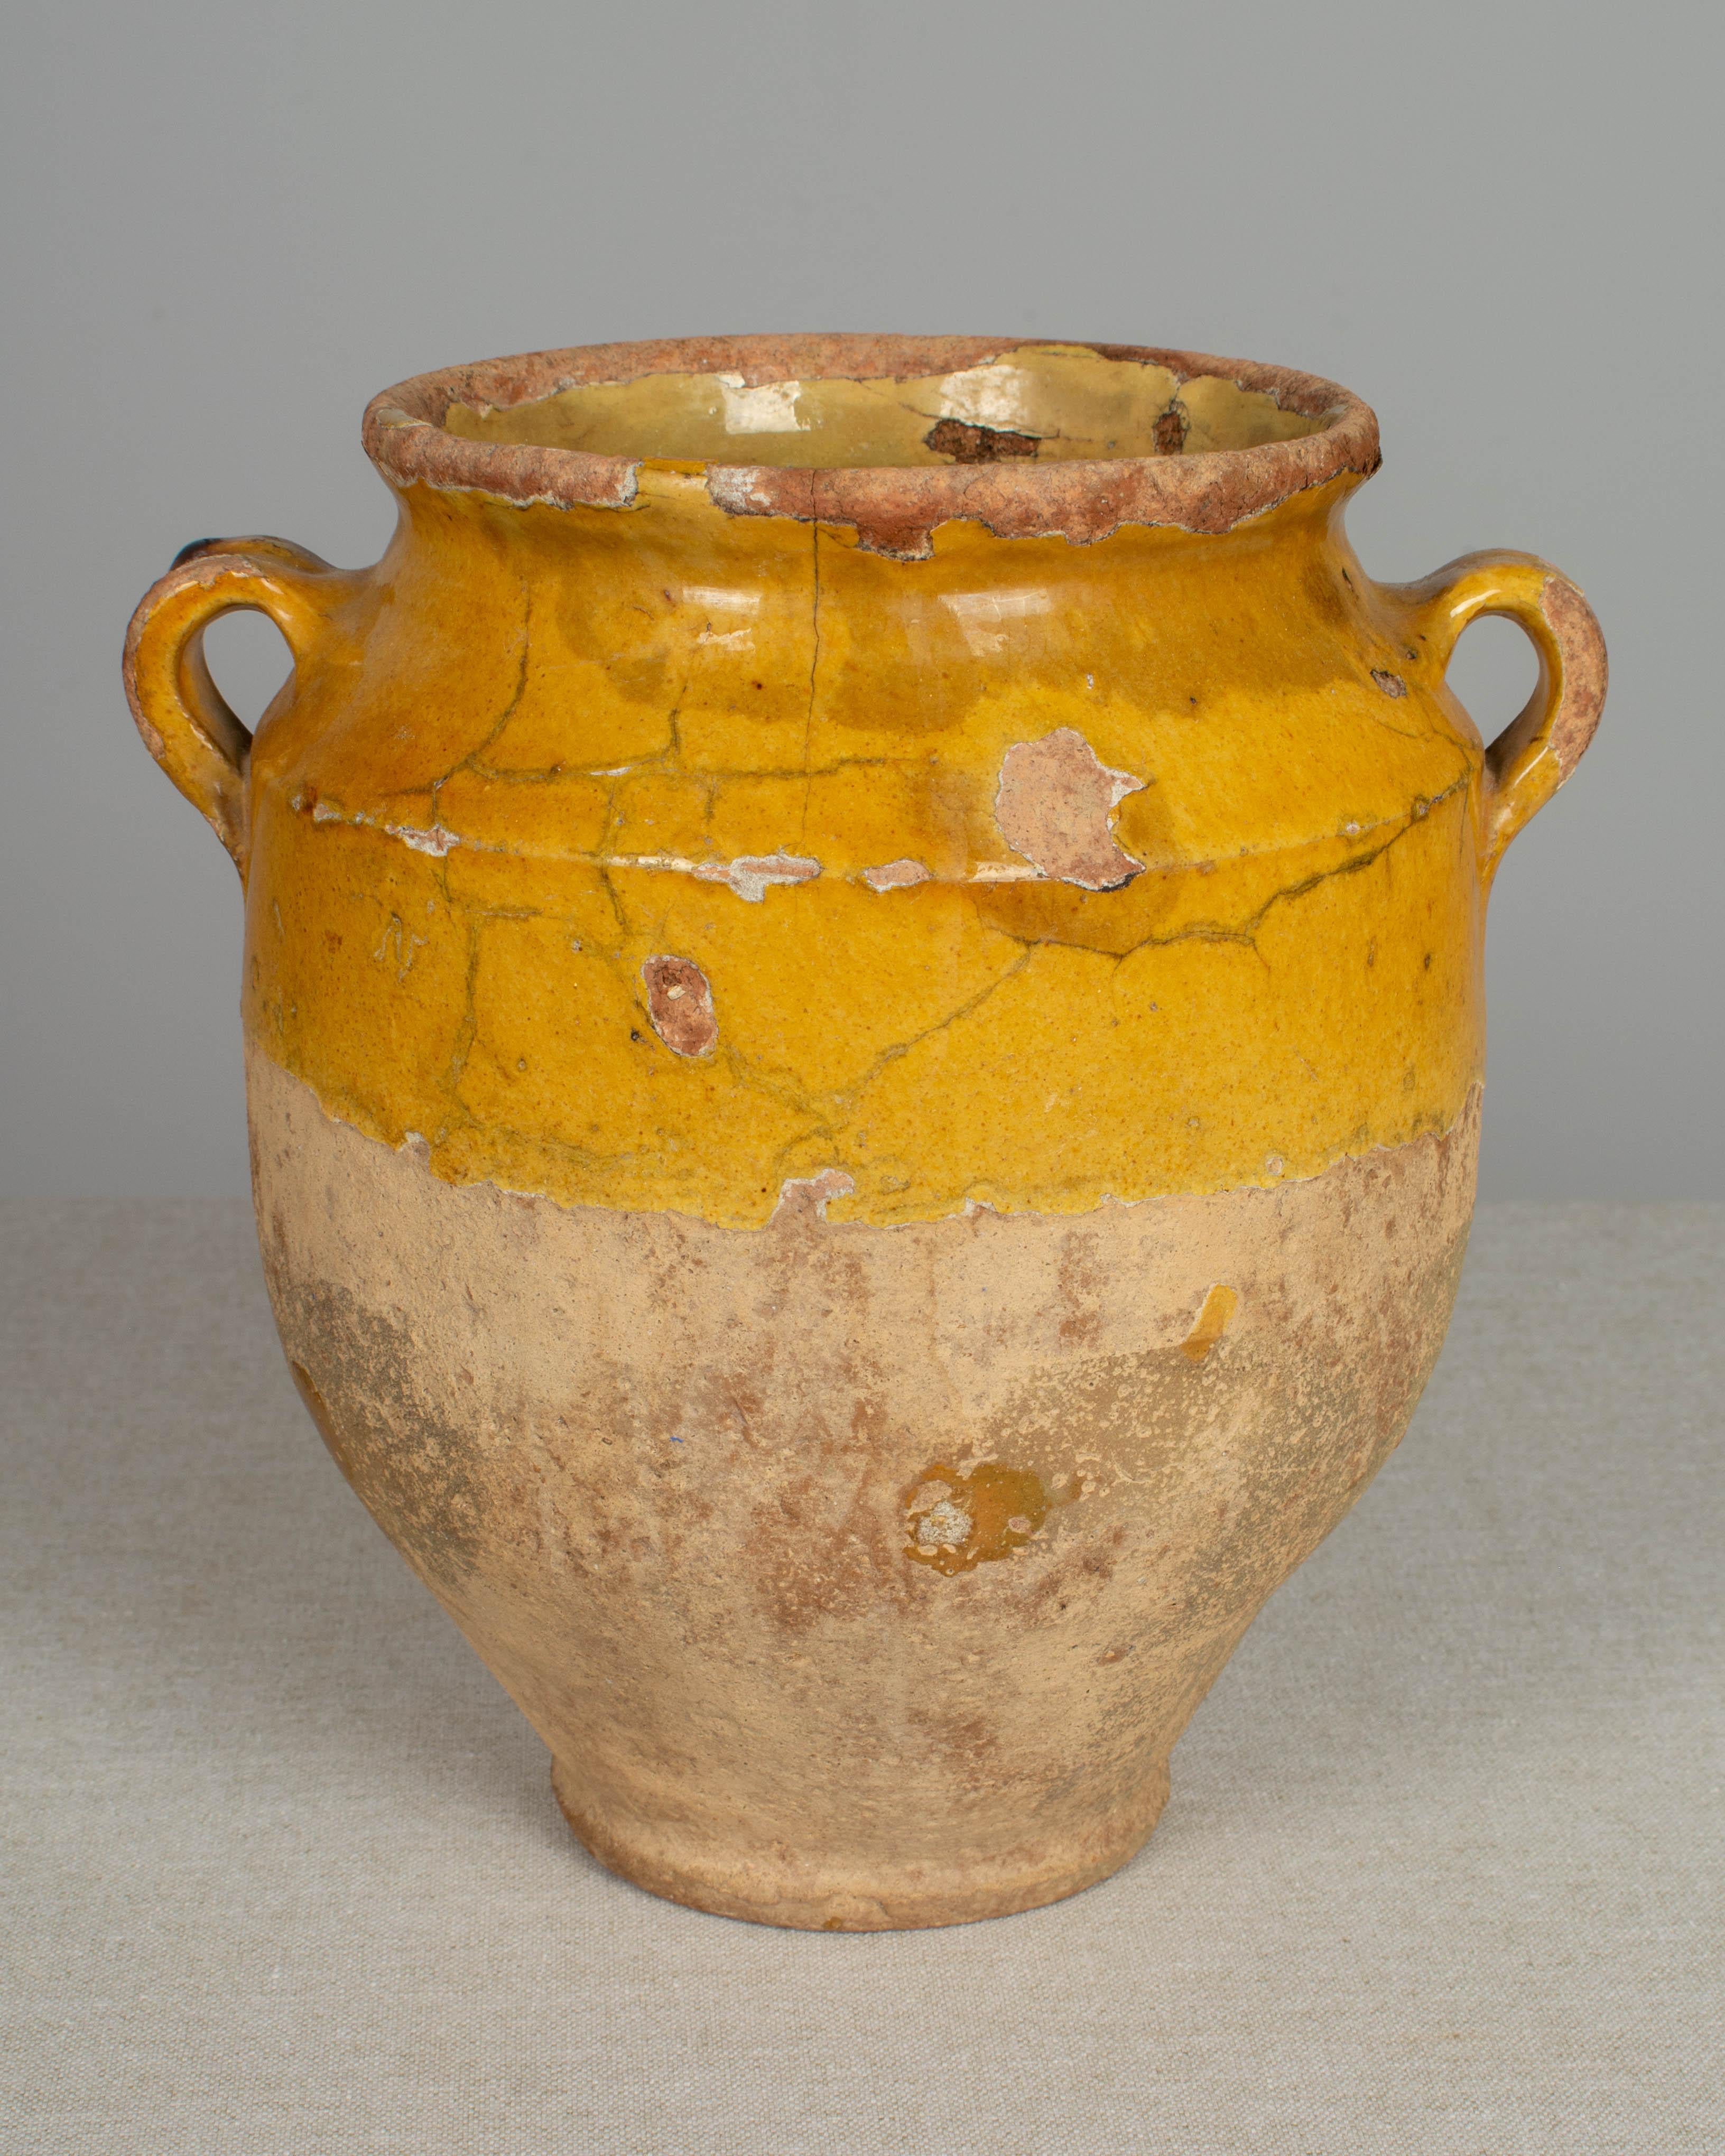 An earthenware confit pot from the Southwest of France with traditional yellow glaze. Beautiful patina and bright yellow color. Hairline cracks and losses to glaze. Weight: 4.2 lbs. These ordinary earthenware vessels were once used daily in the